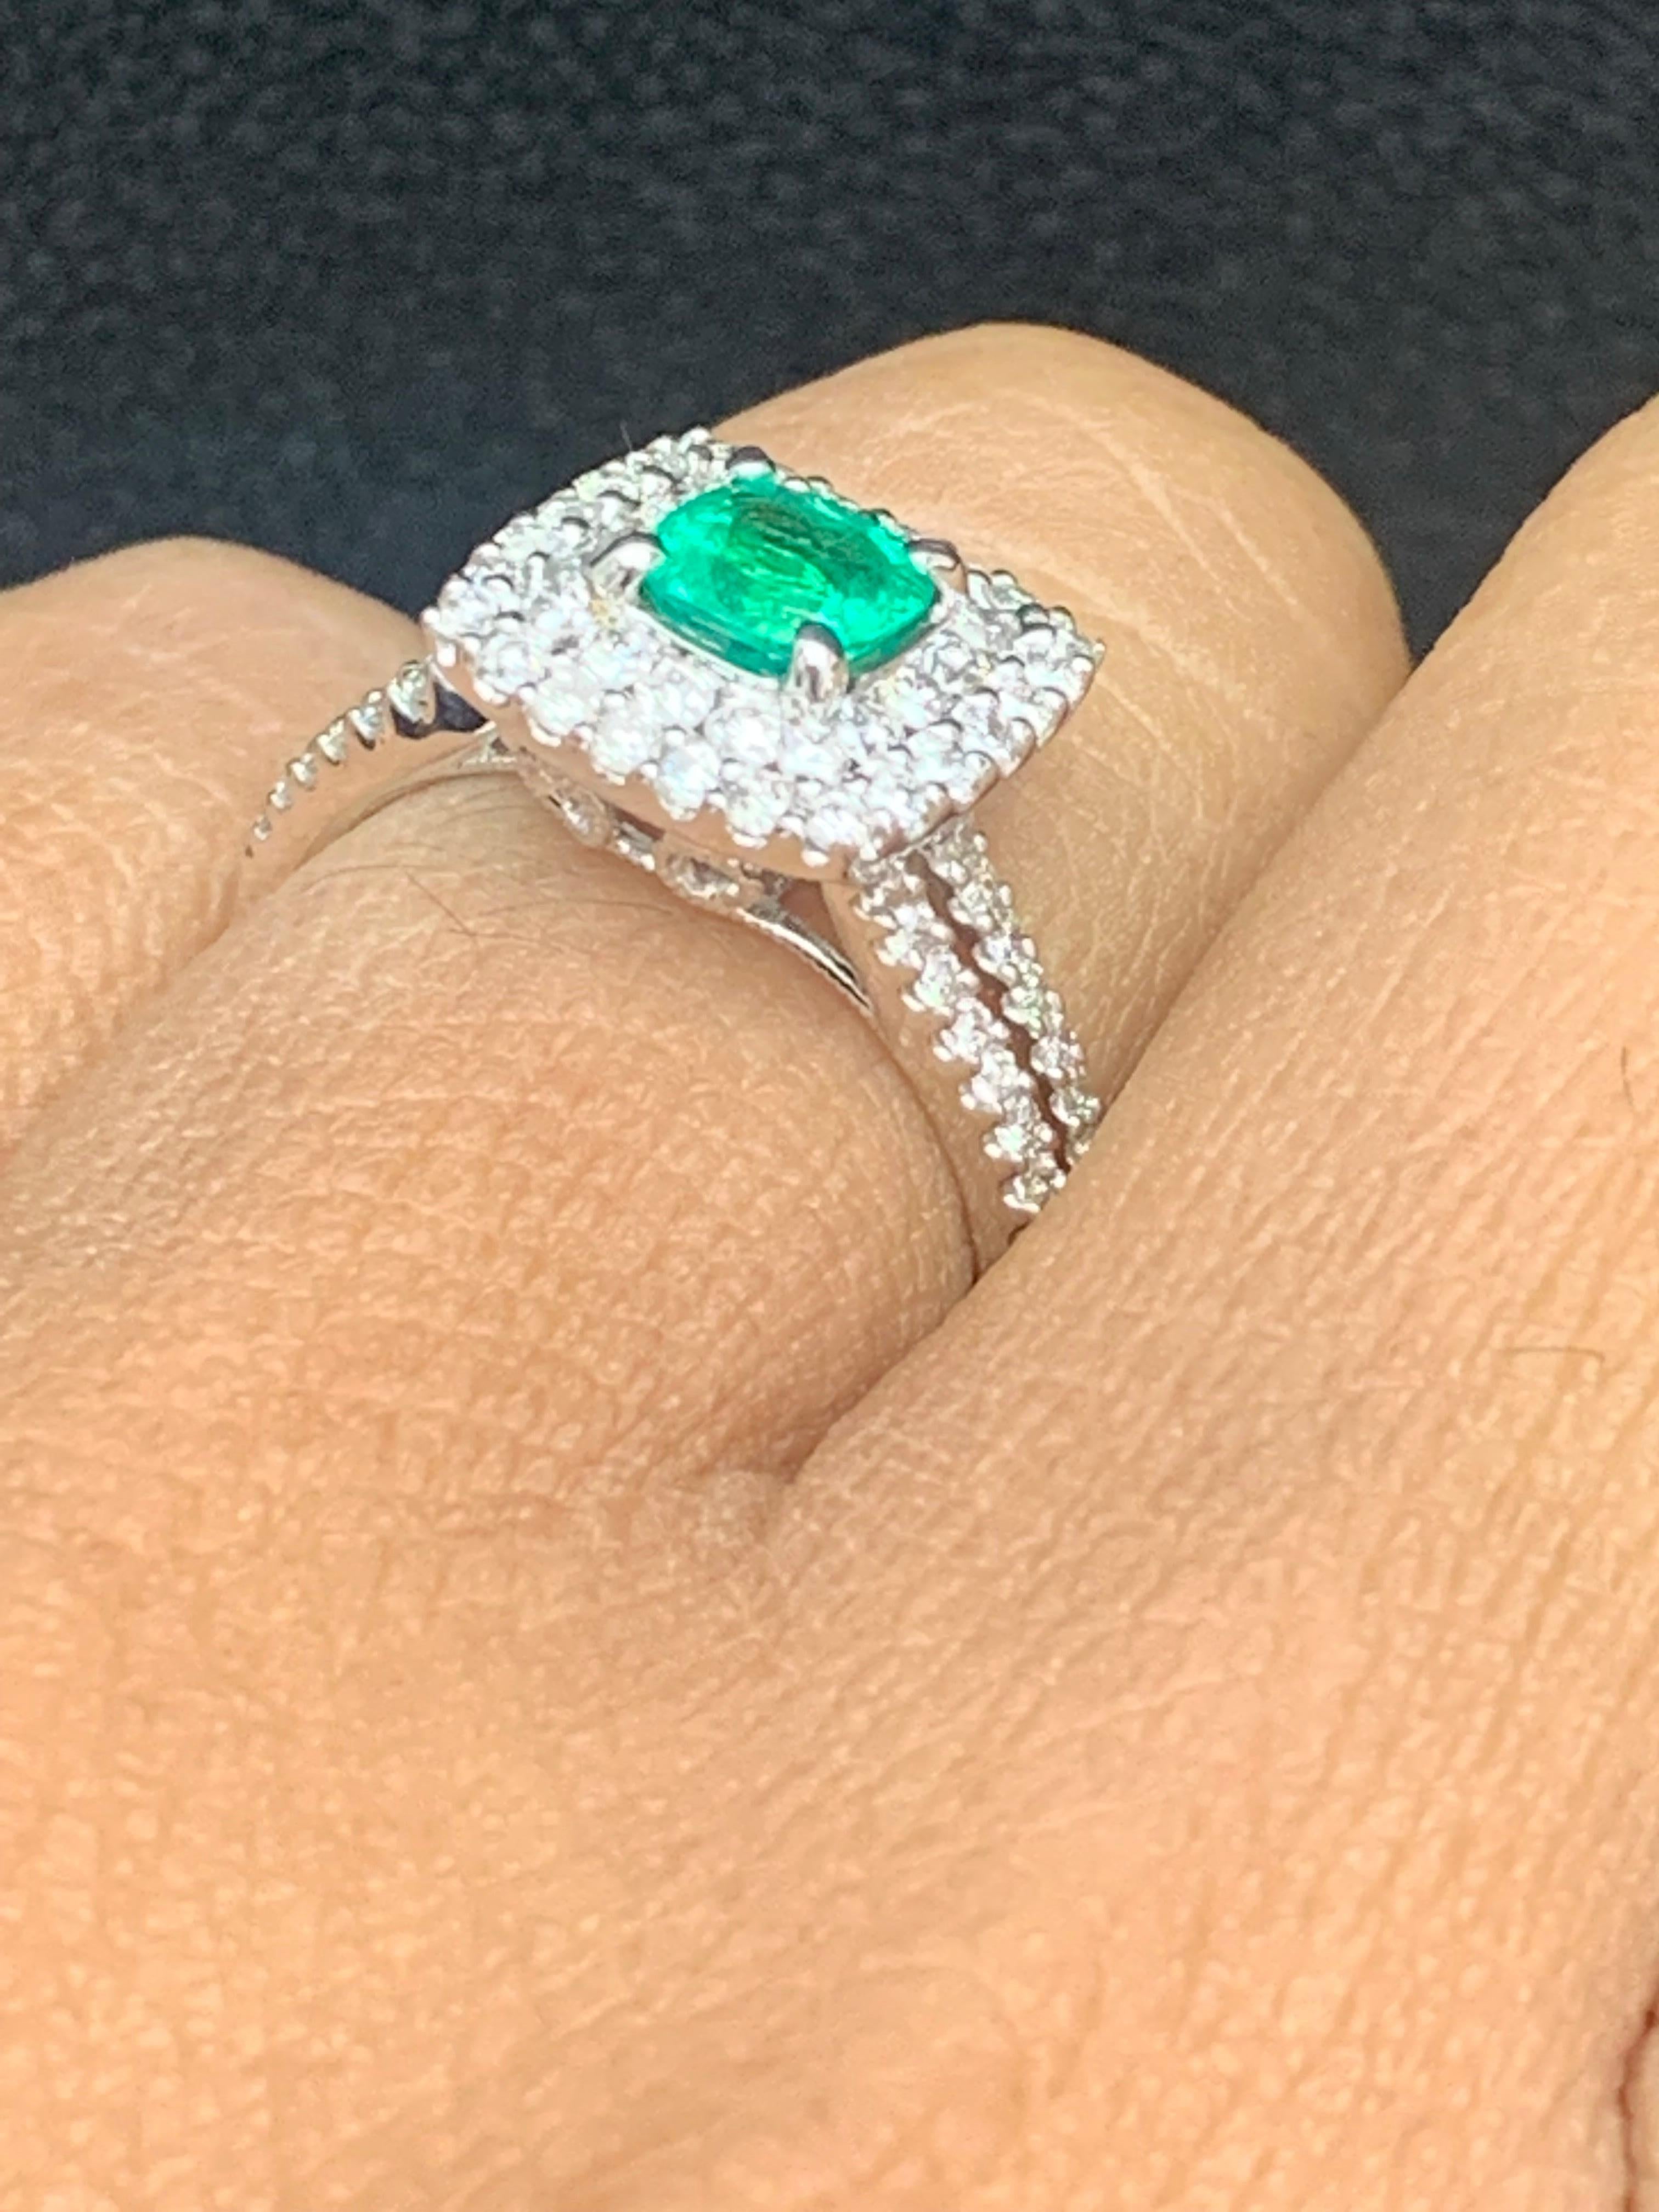 0.48 Carat Cushion Cut Emerald and Diamond Fashion Ring in 18K White Gold For Sale 2